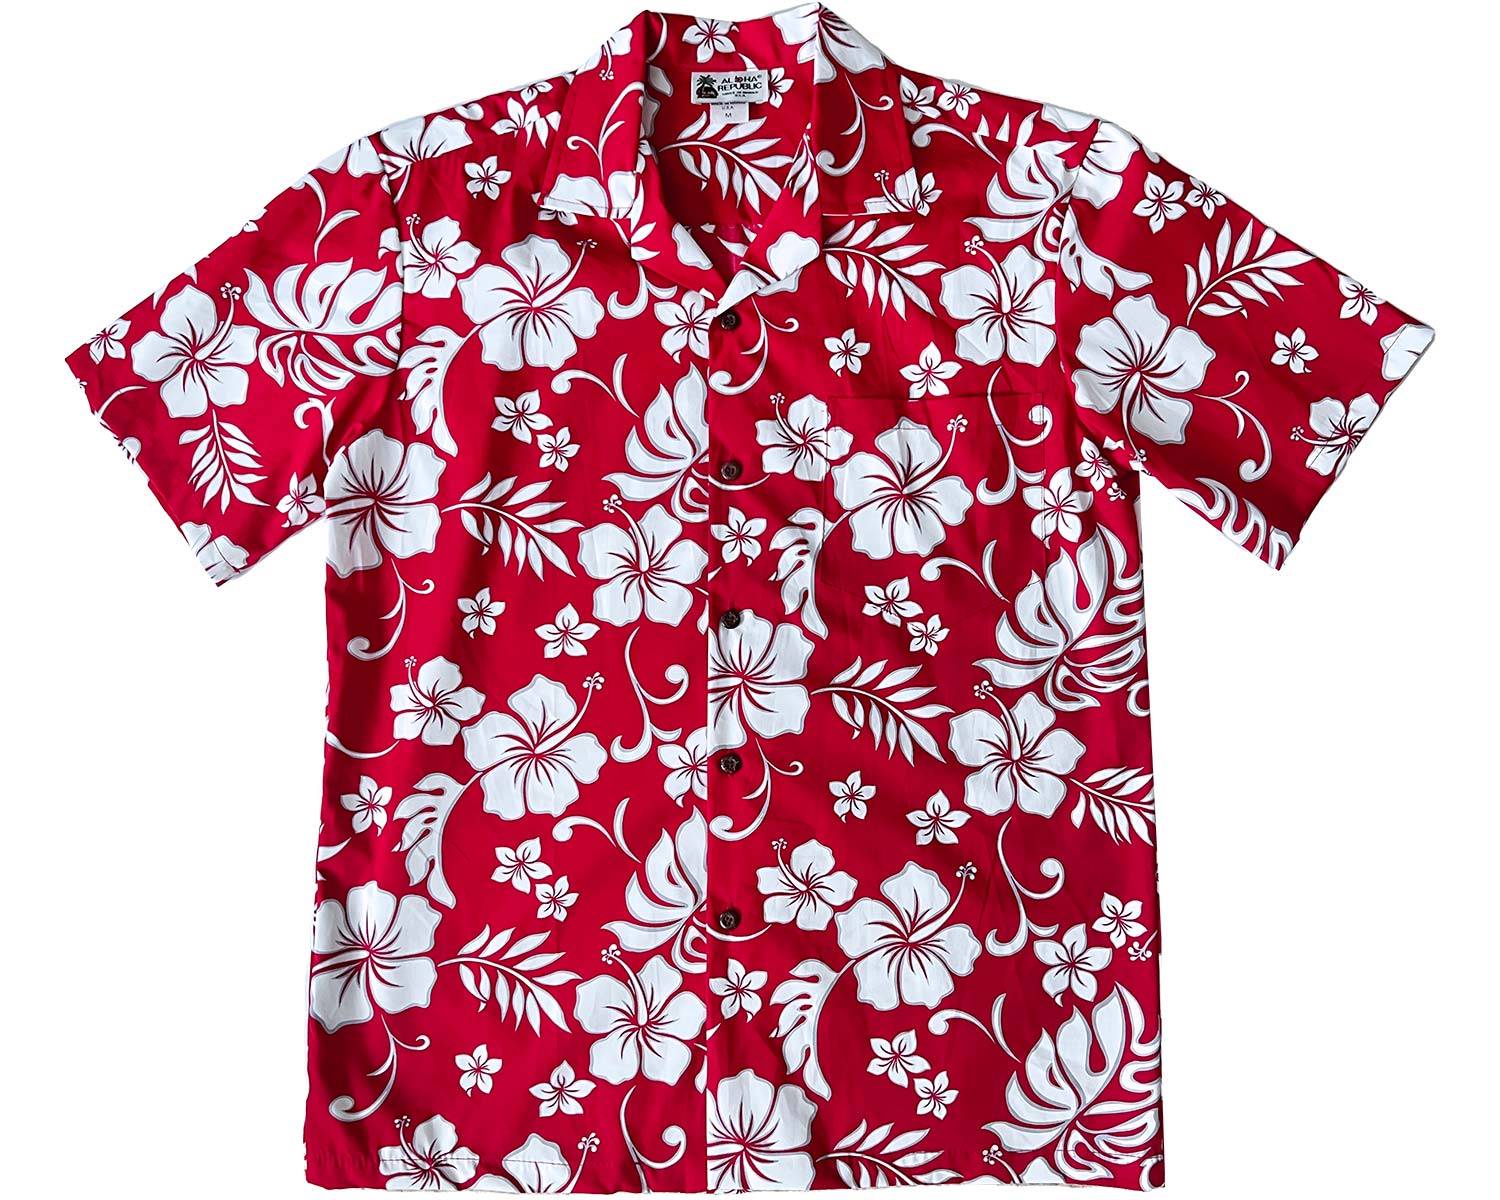 Cleveland Indians Tiny White Hibiscus Pattern Red Background 3D Hawaiian  Shirt Gift For Fans - Freedomdesign